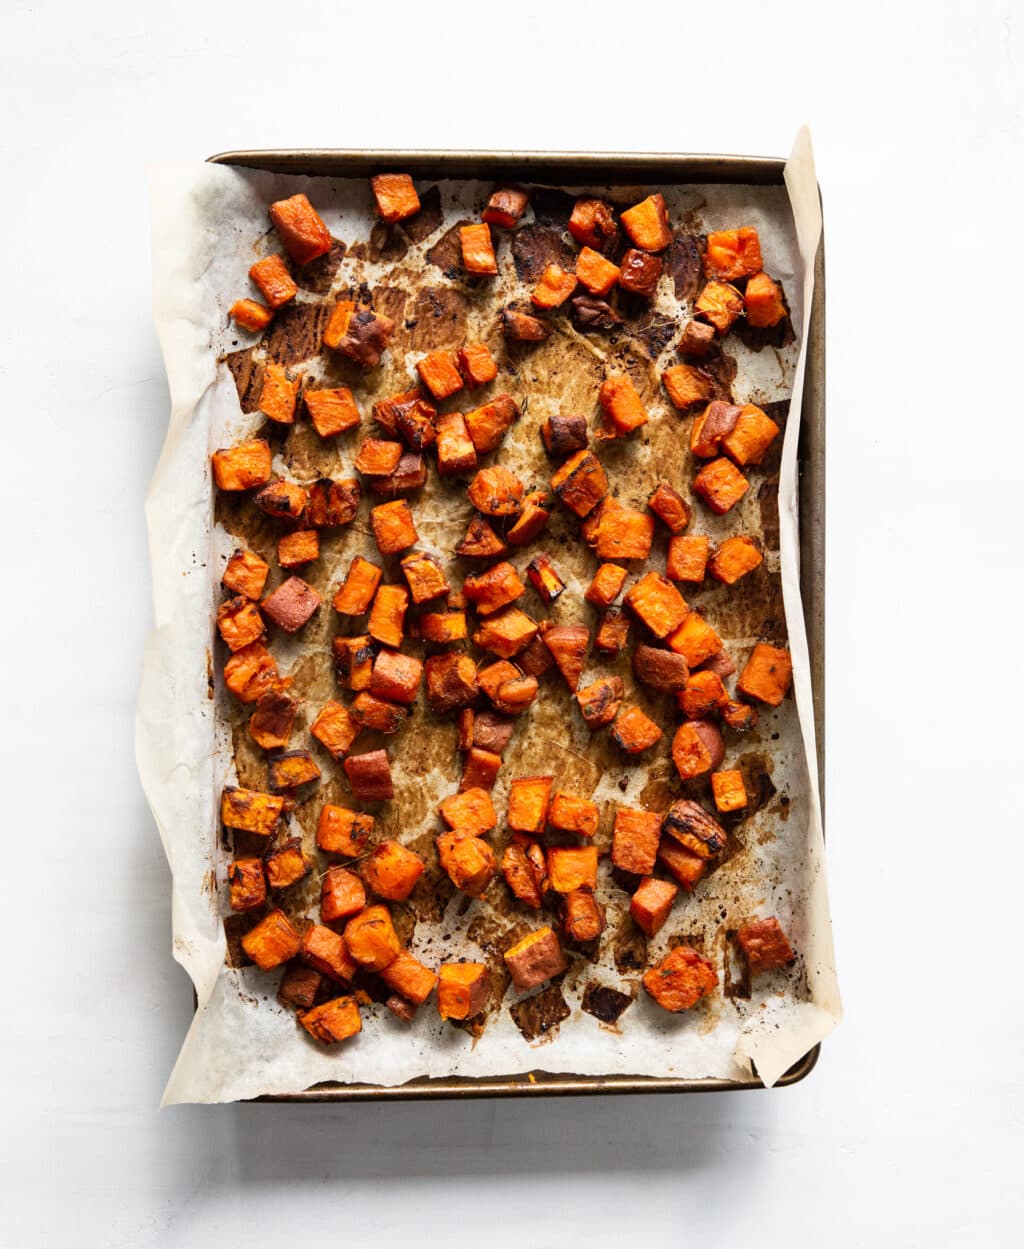 A baking sheet lined with parchment paper has golden brown, baked sweet potatoes on it. The sweet potatoes are cubed.